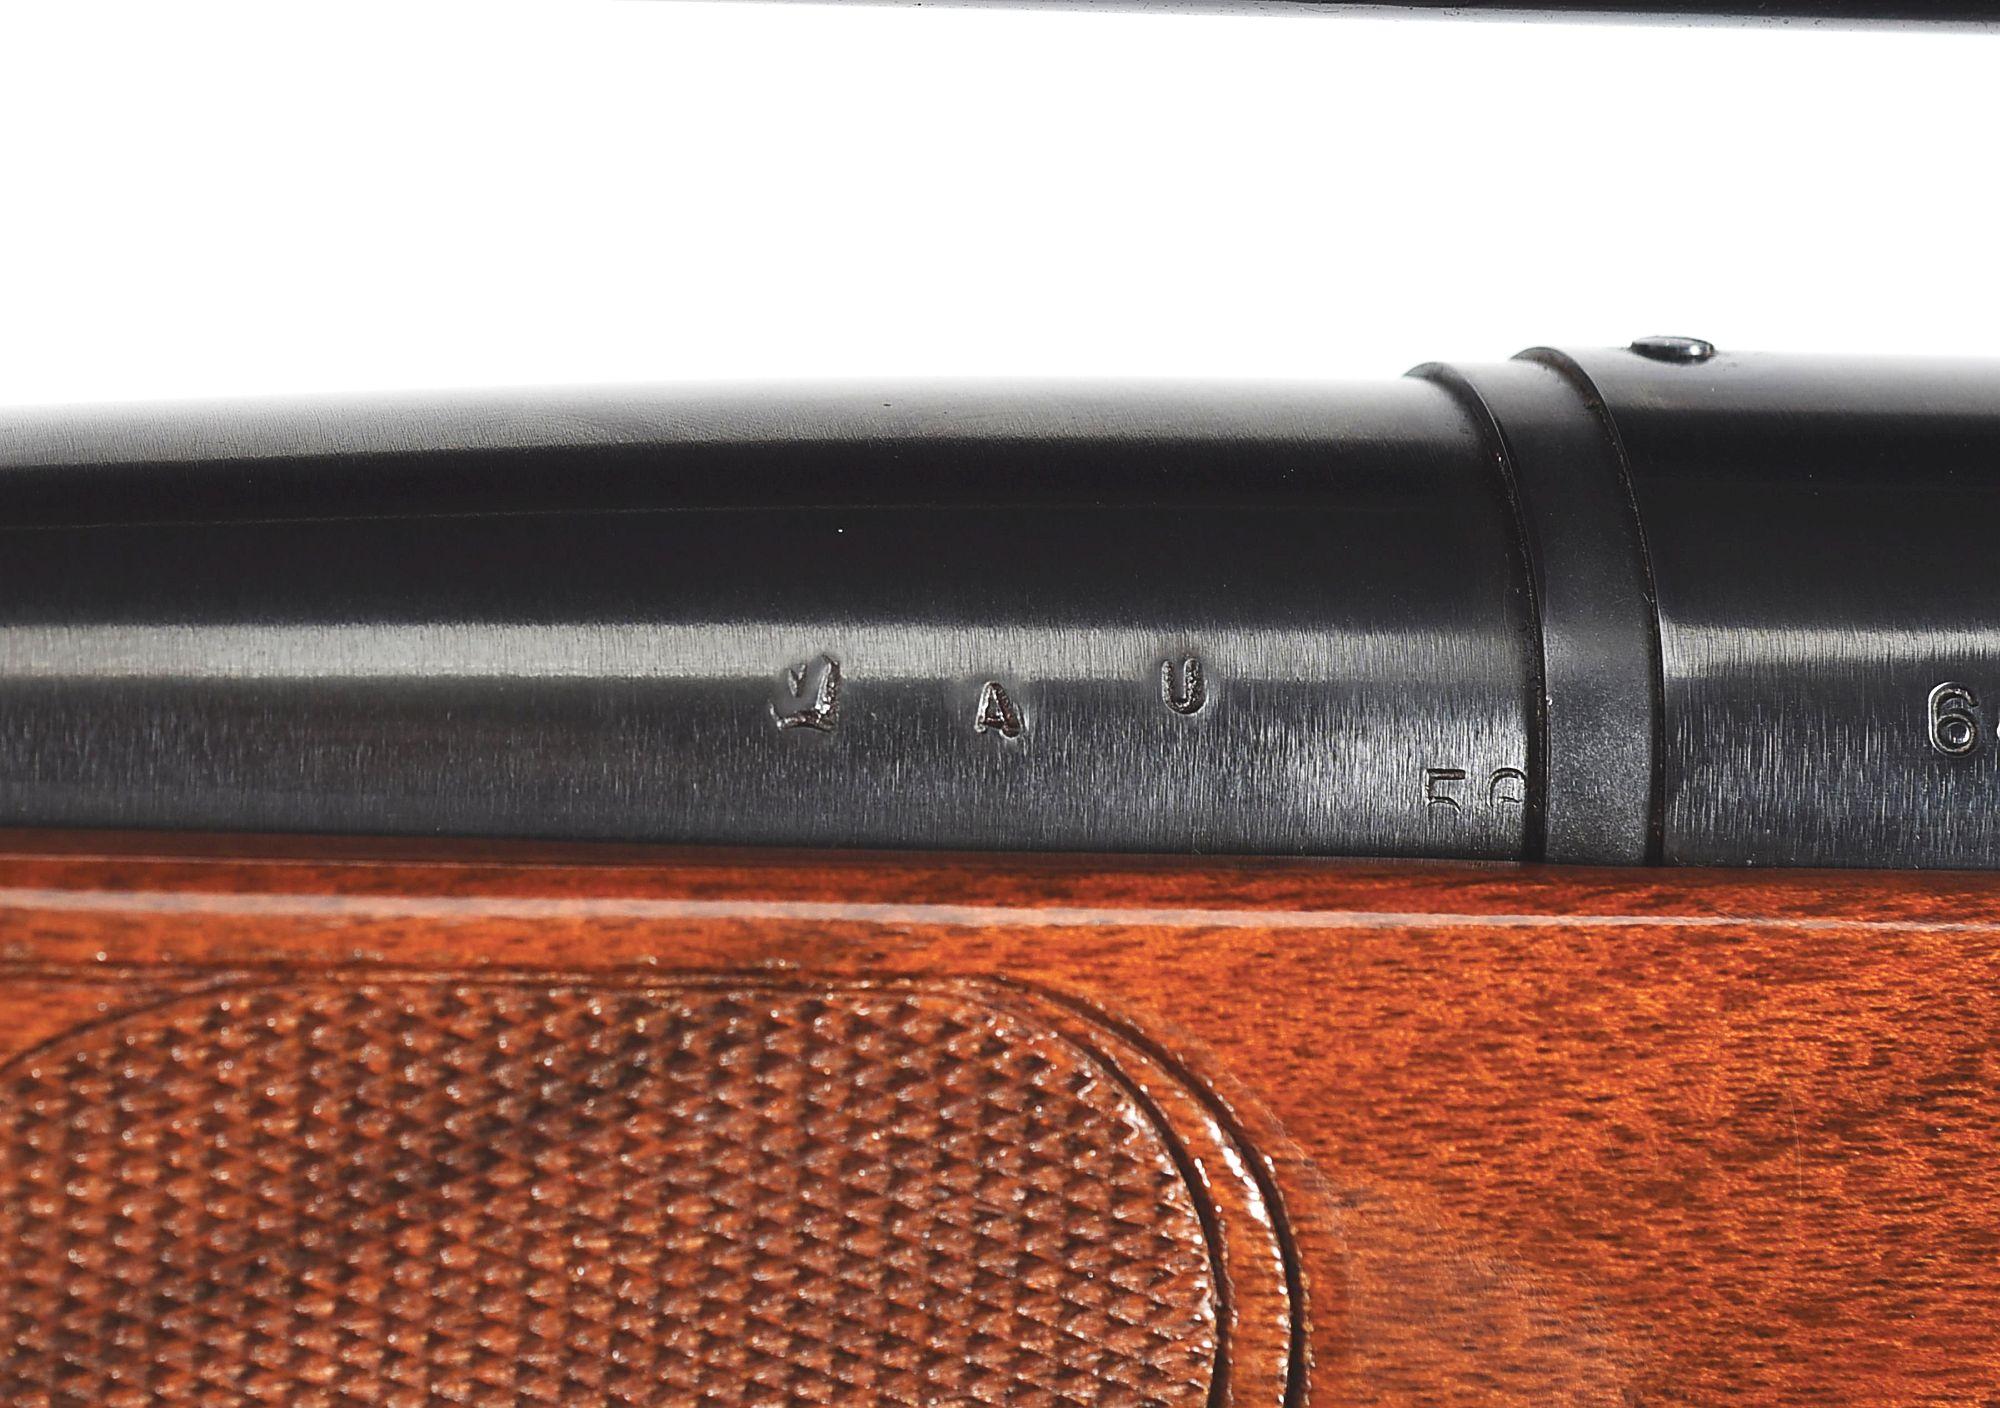 (C) REMINGTON MODEL 700 VARMINT SPECIAL BOLT ACTION RIFLE IN .222 WITH LYMAN OPTIC.